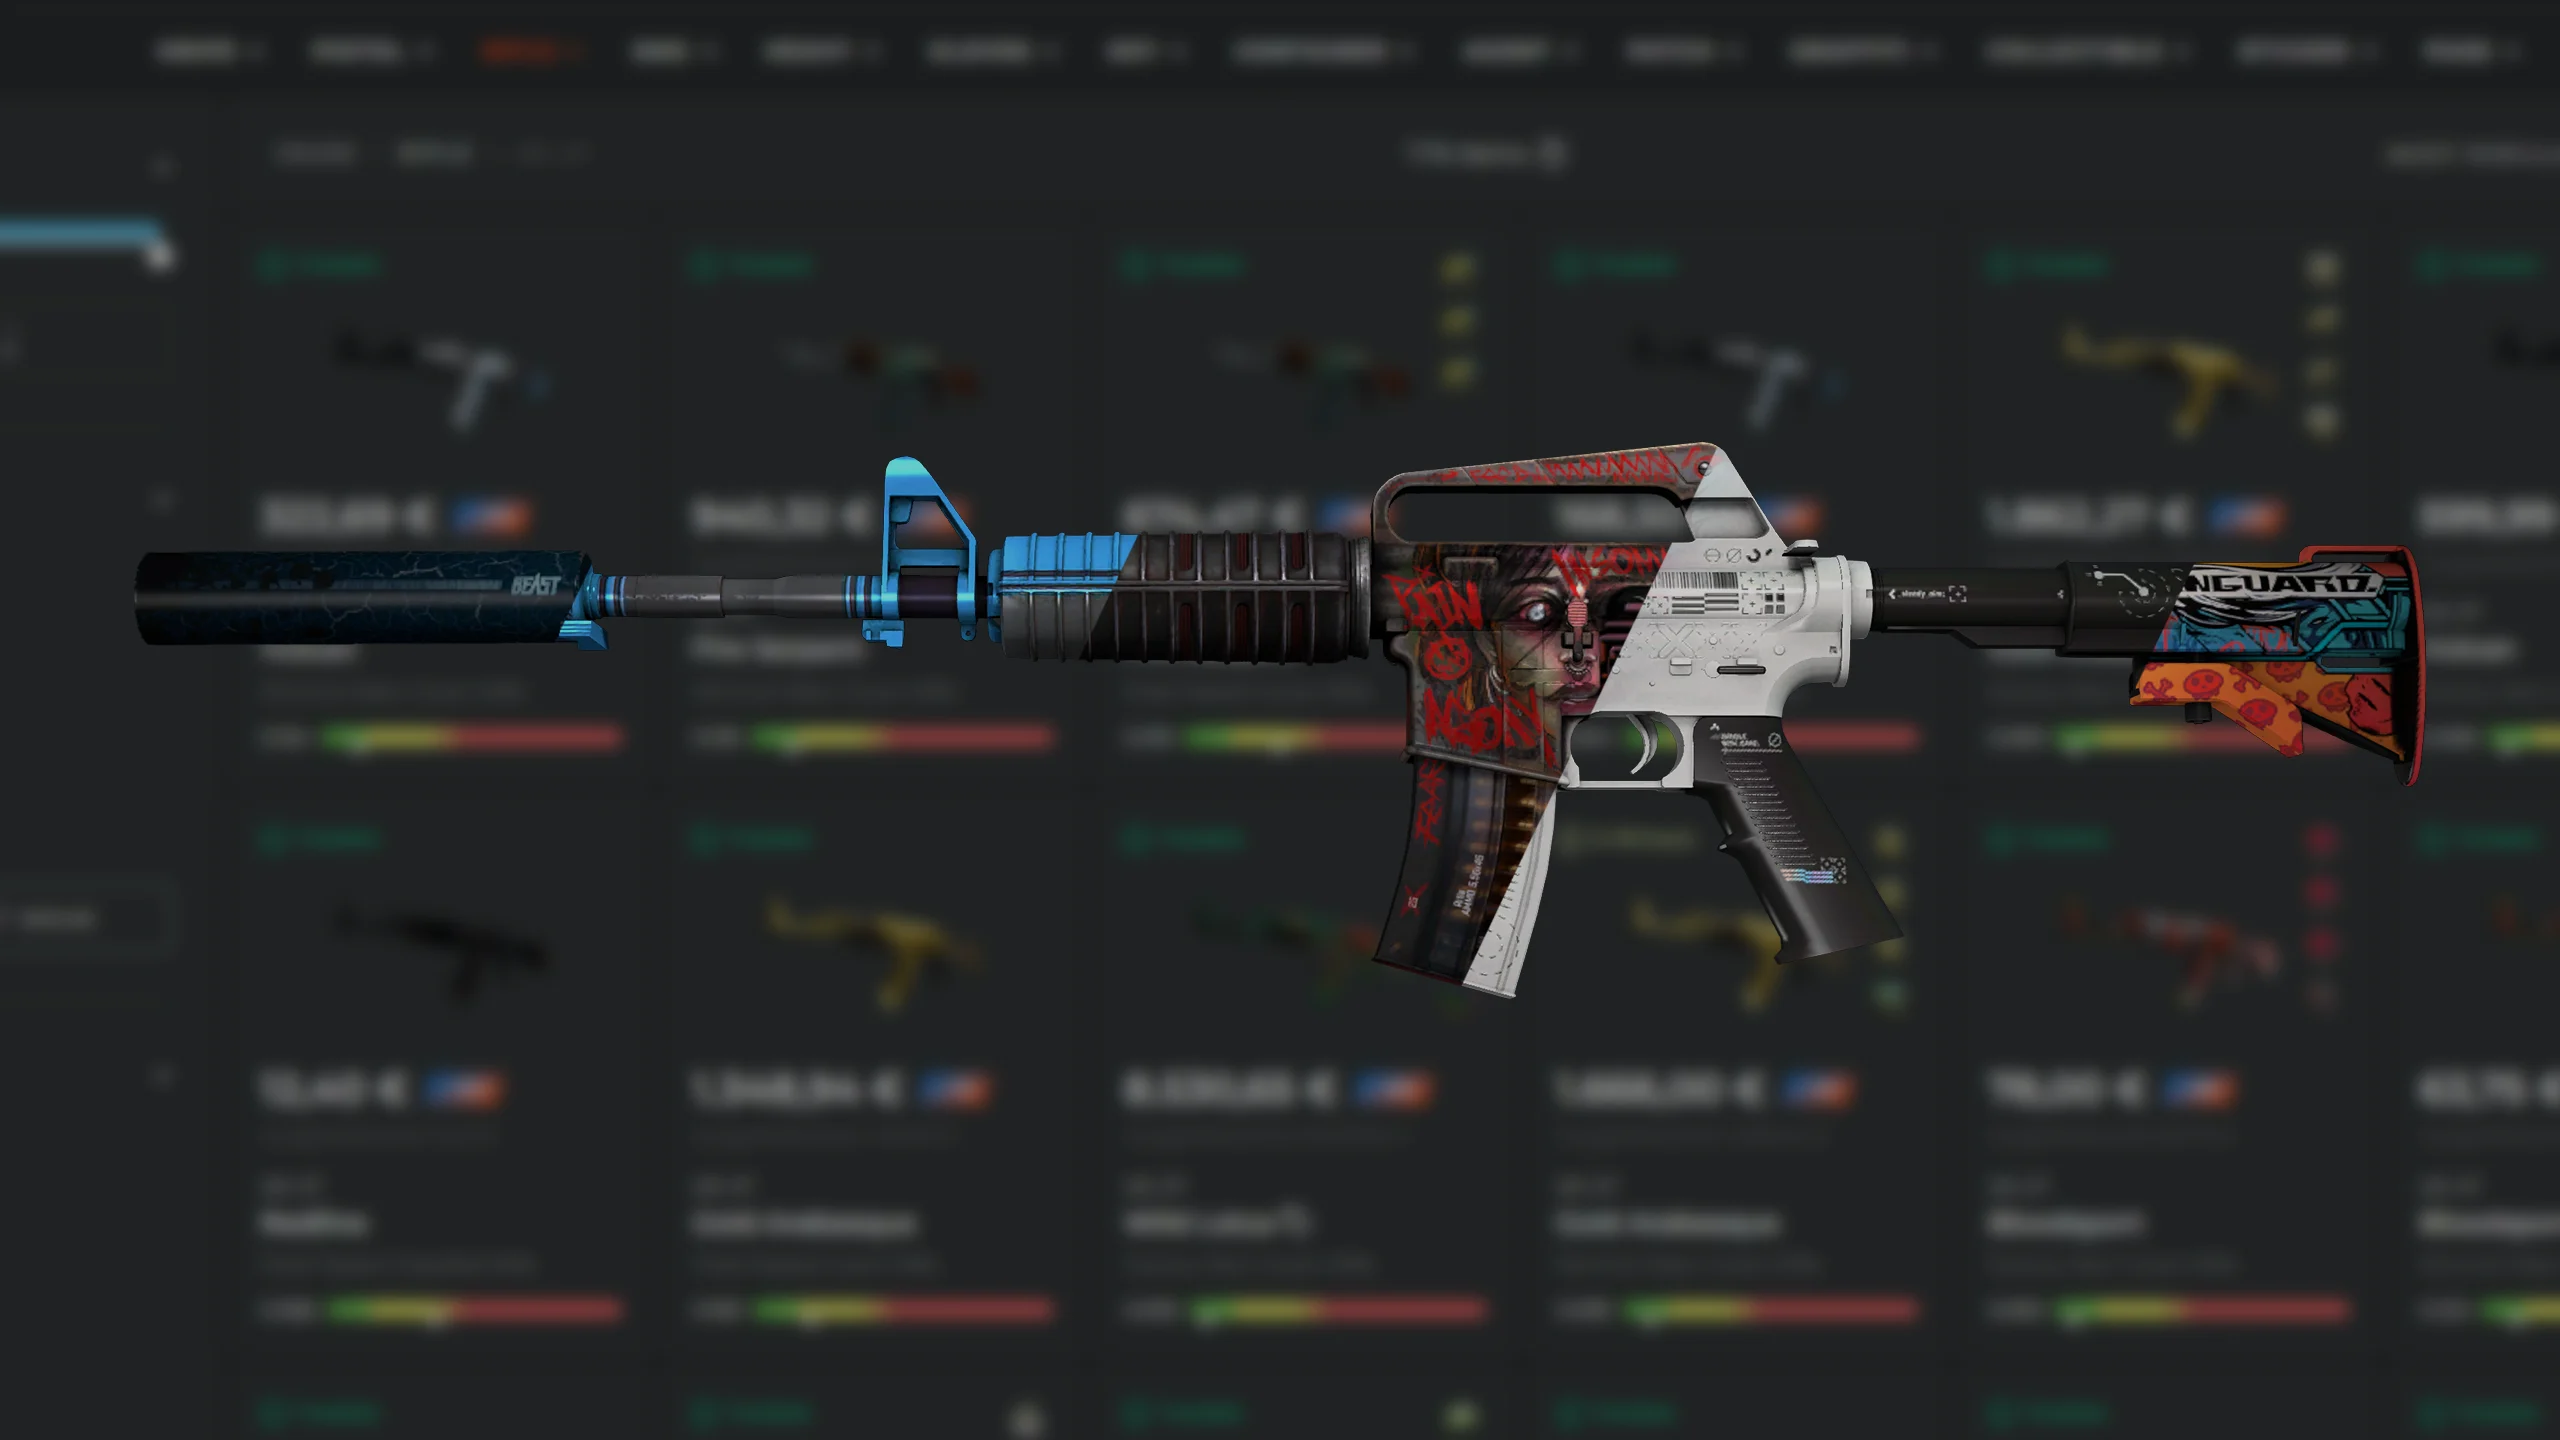 Best M4A1-S Skins 2022